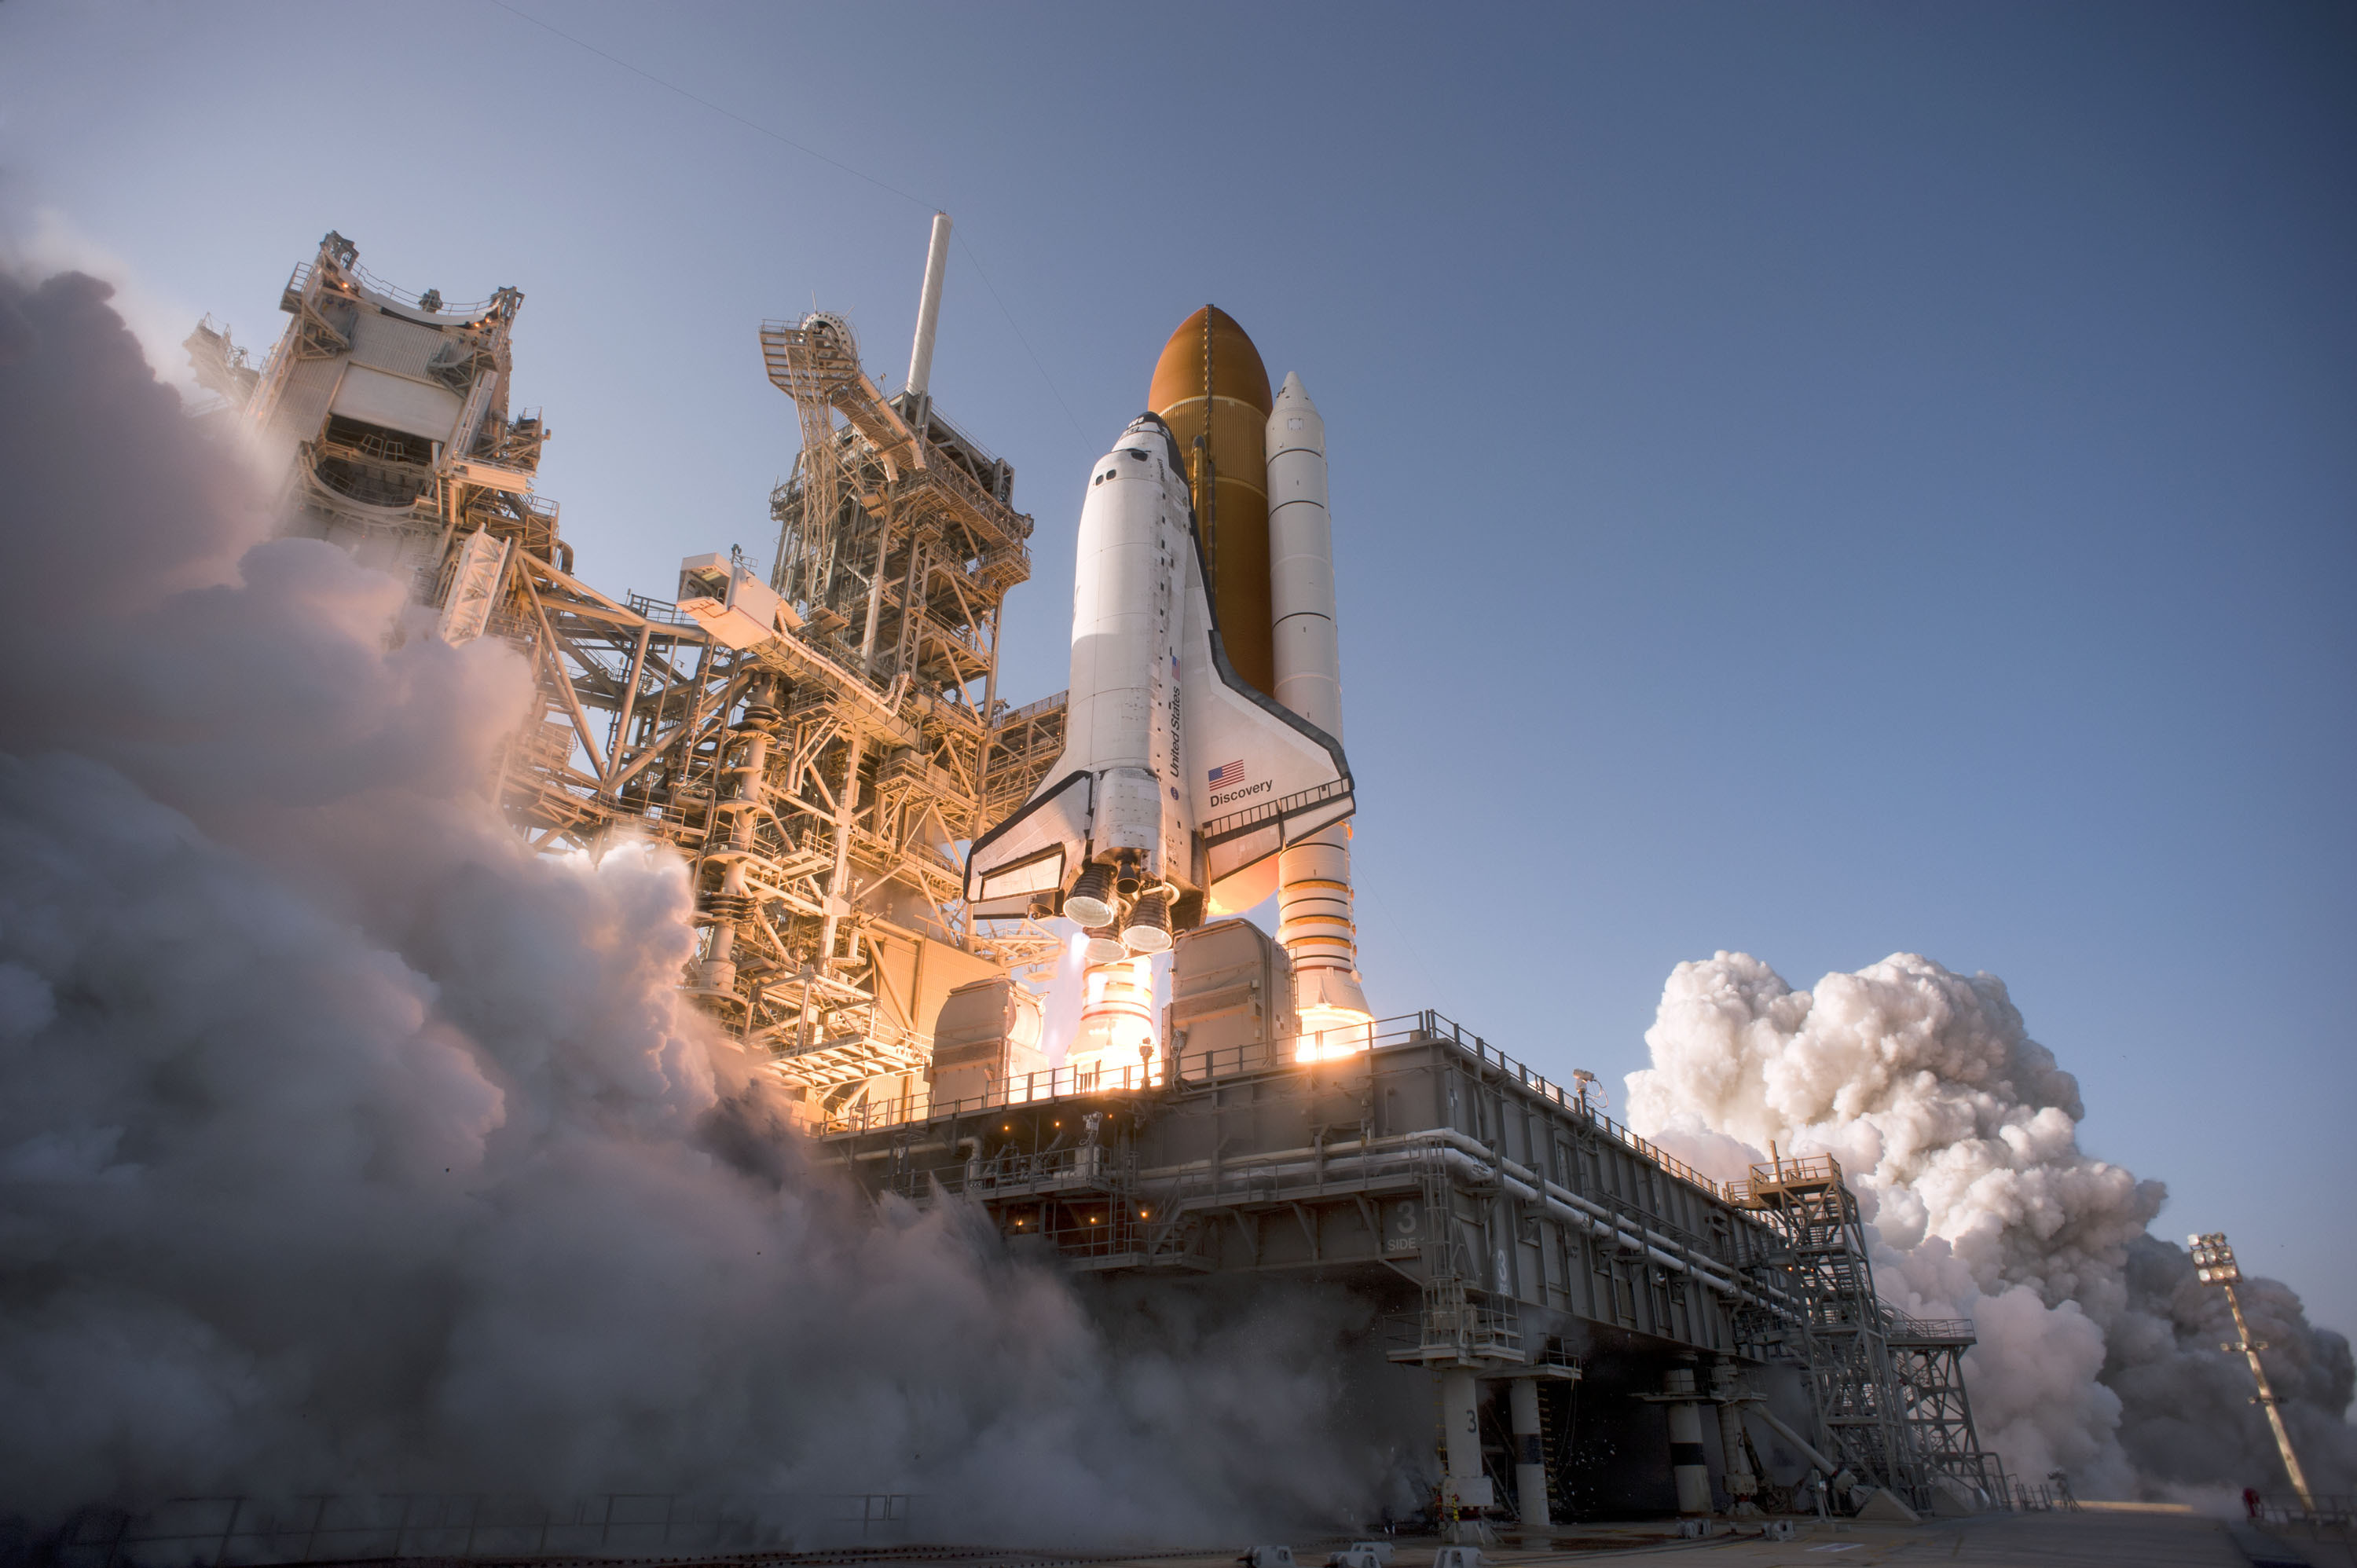 space shuttle launch pic